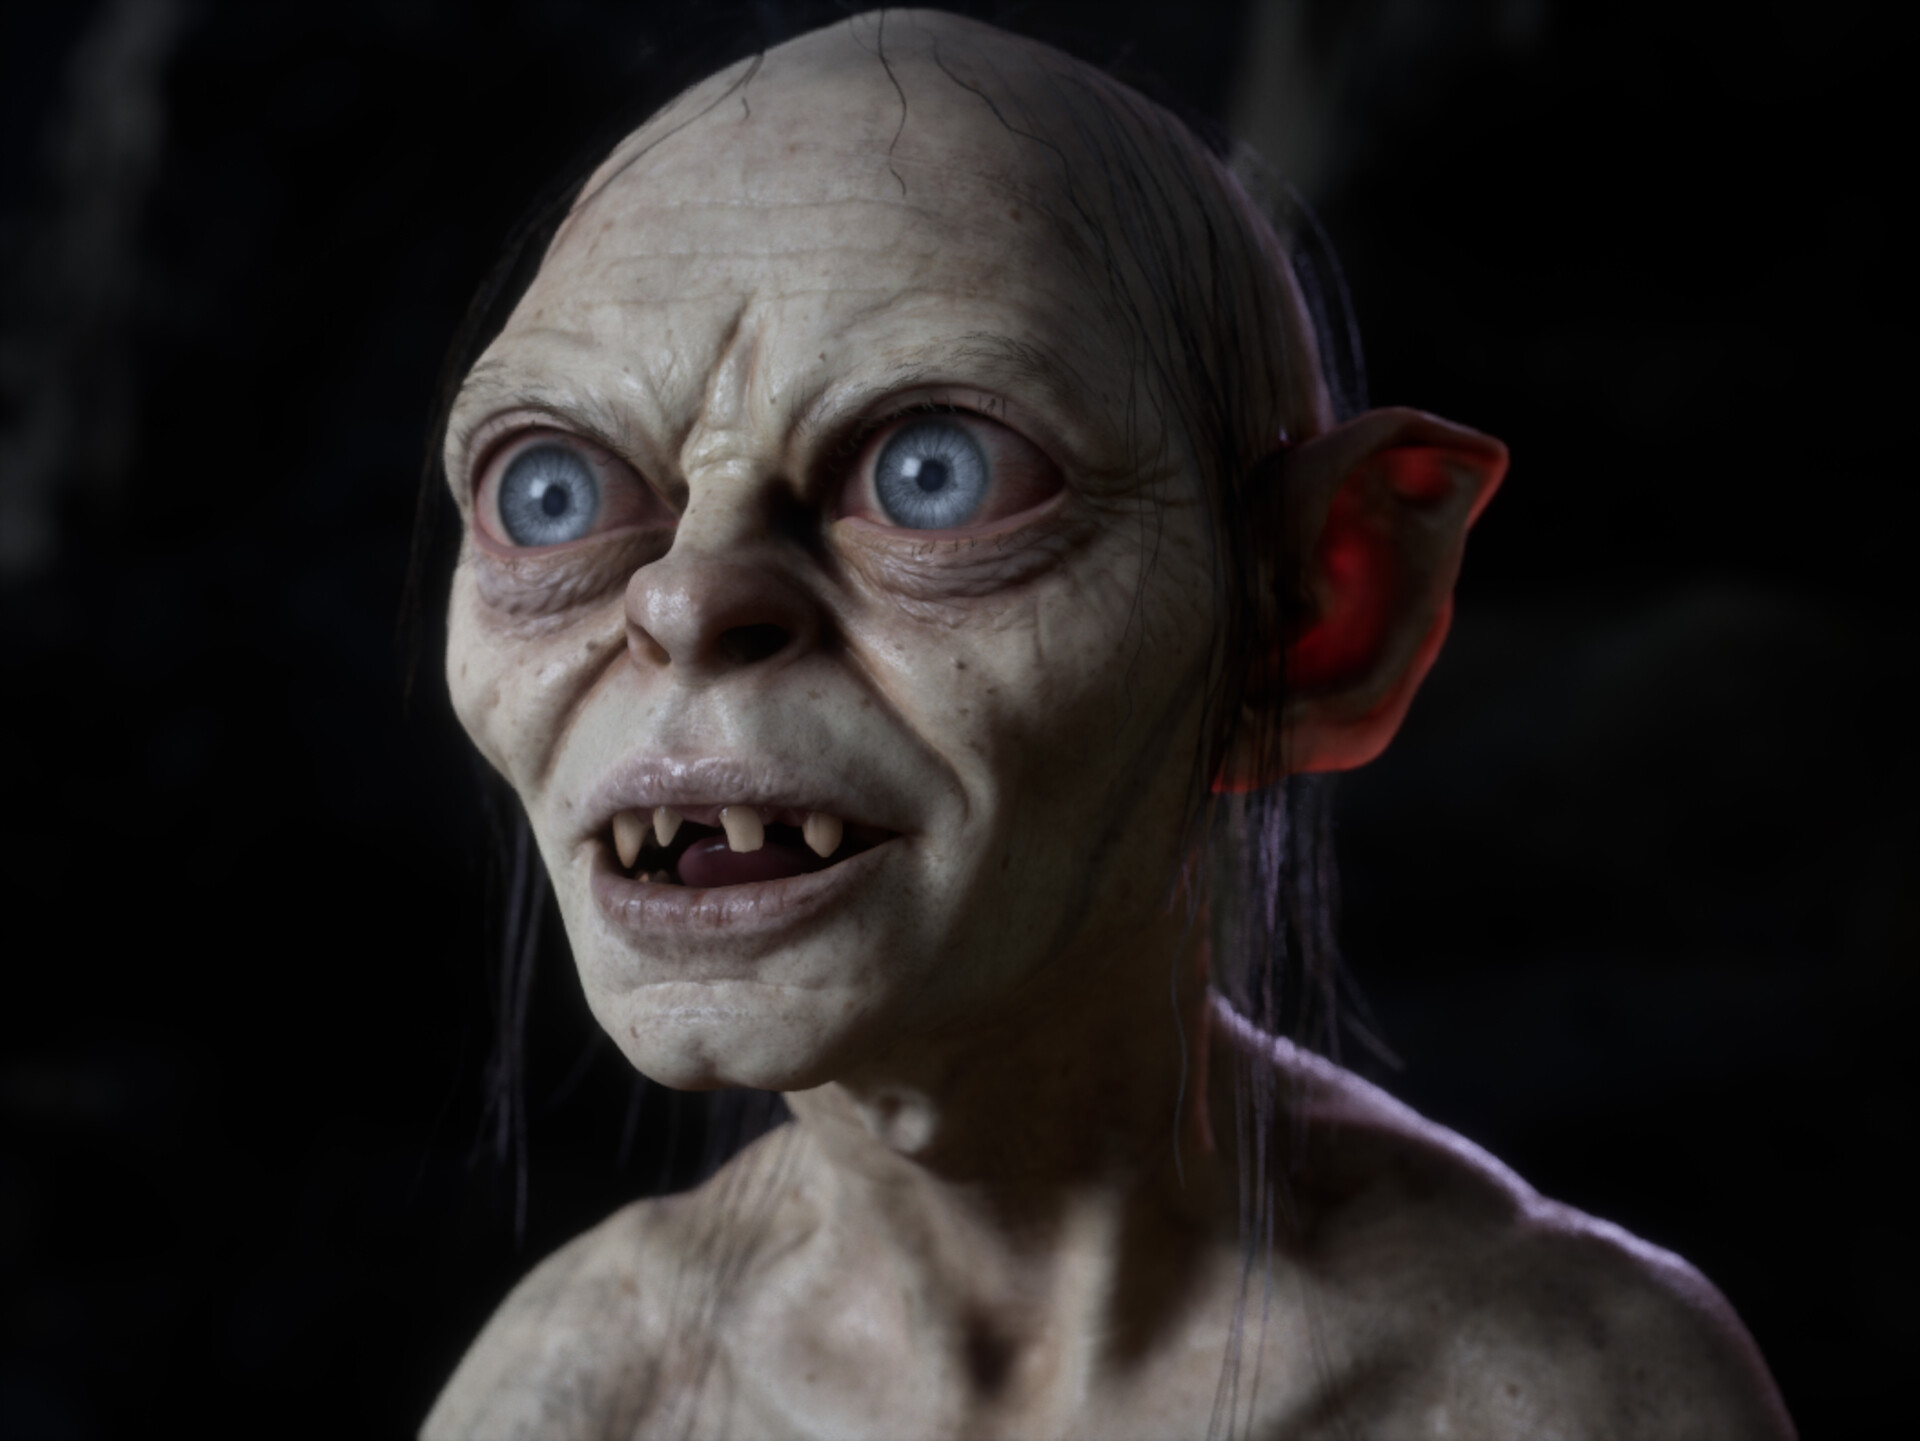 ArtStation - Study of Gollum from The Hobbit: An Unexpected Journey